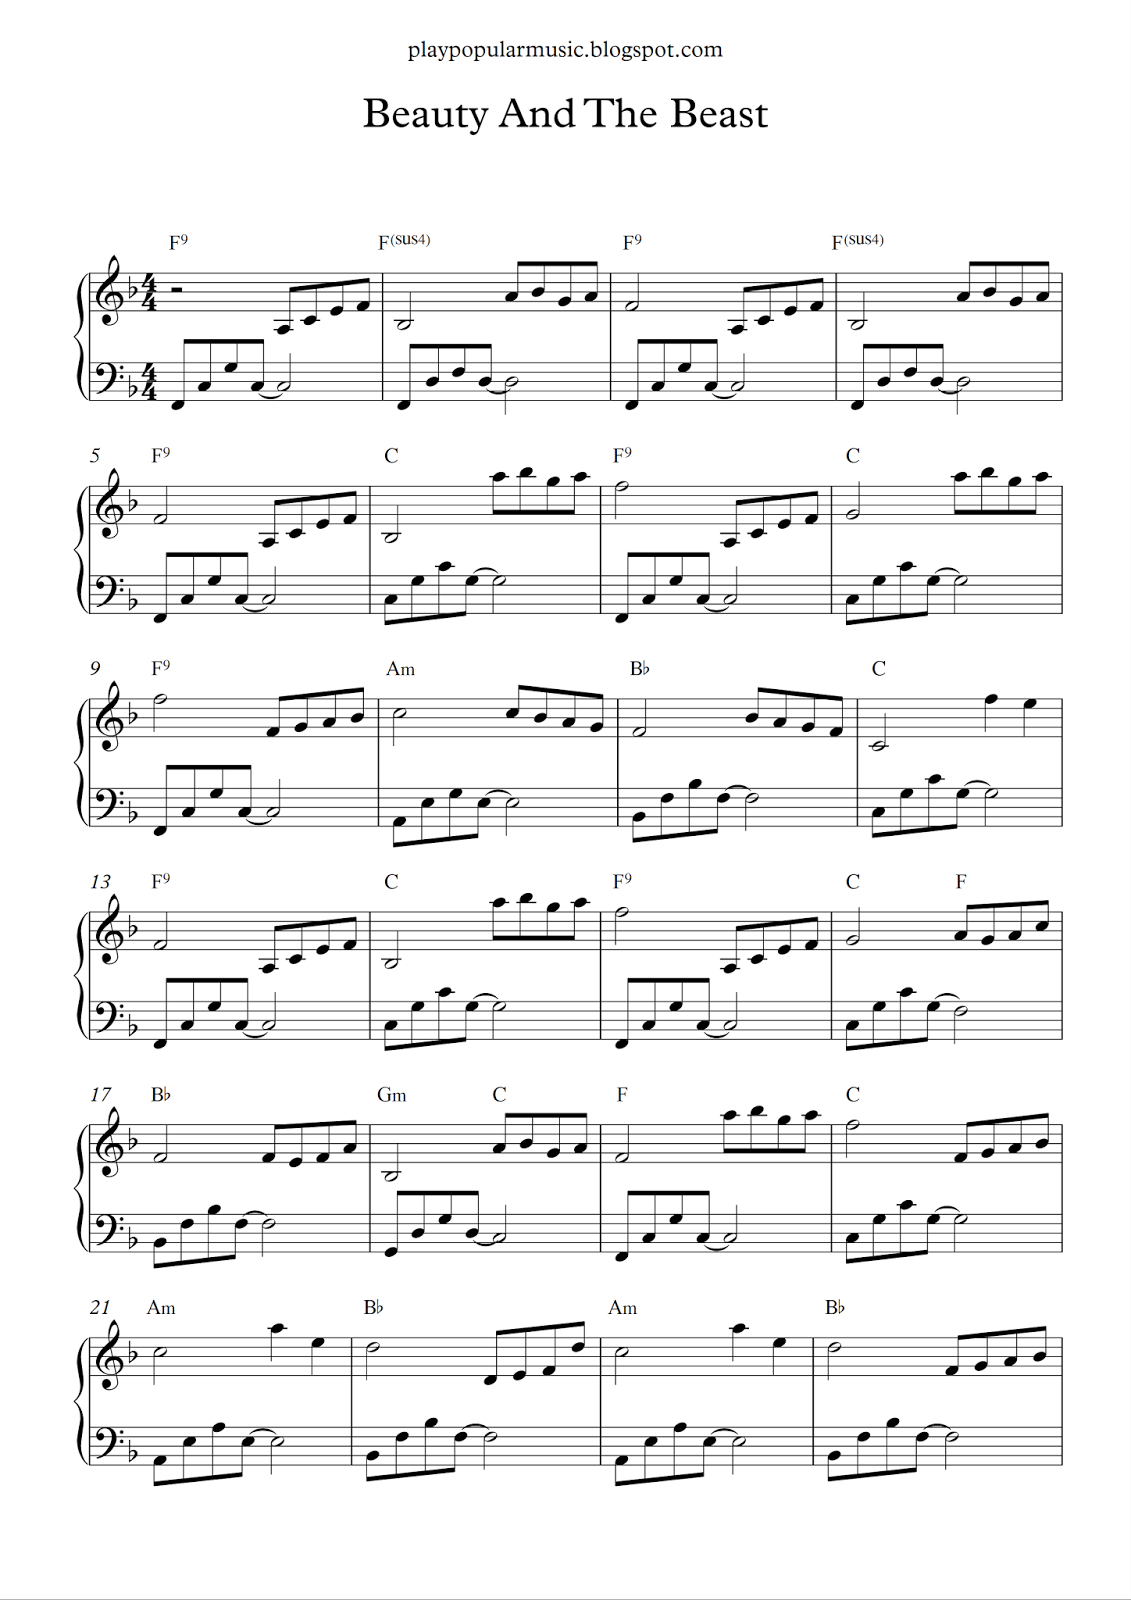 Free Piano Sheet Music: Beauty And The Beast.pdf Tale As Old As Time - Free Printable Piano Sheet Music For Popular Songs